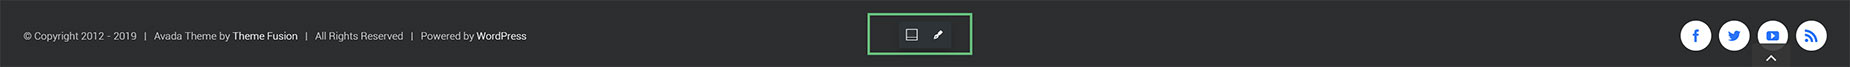 Footer Control Icons